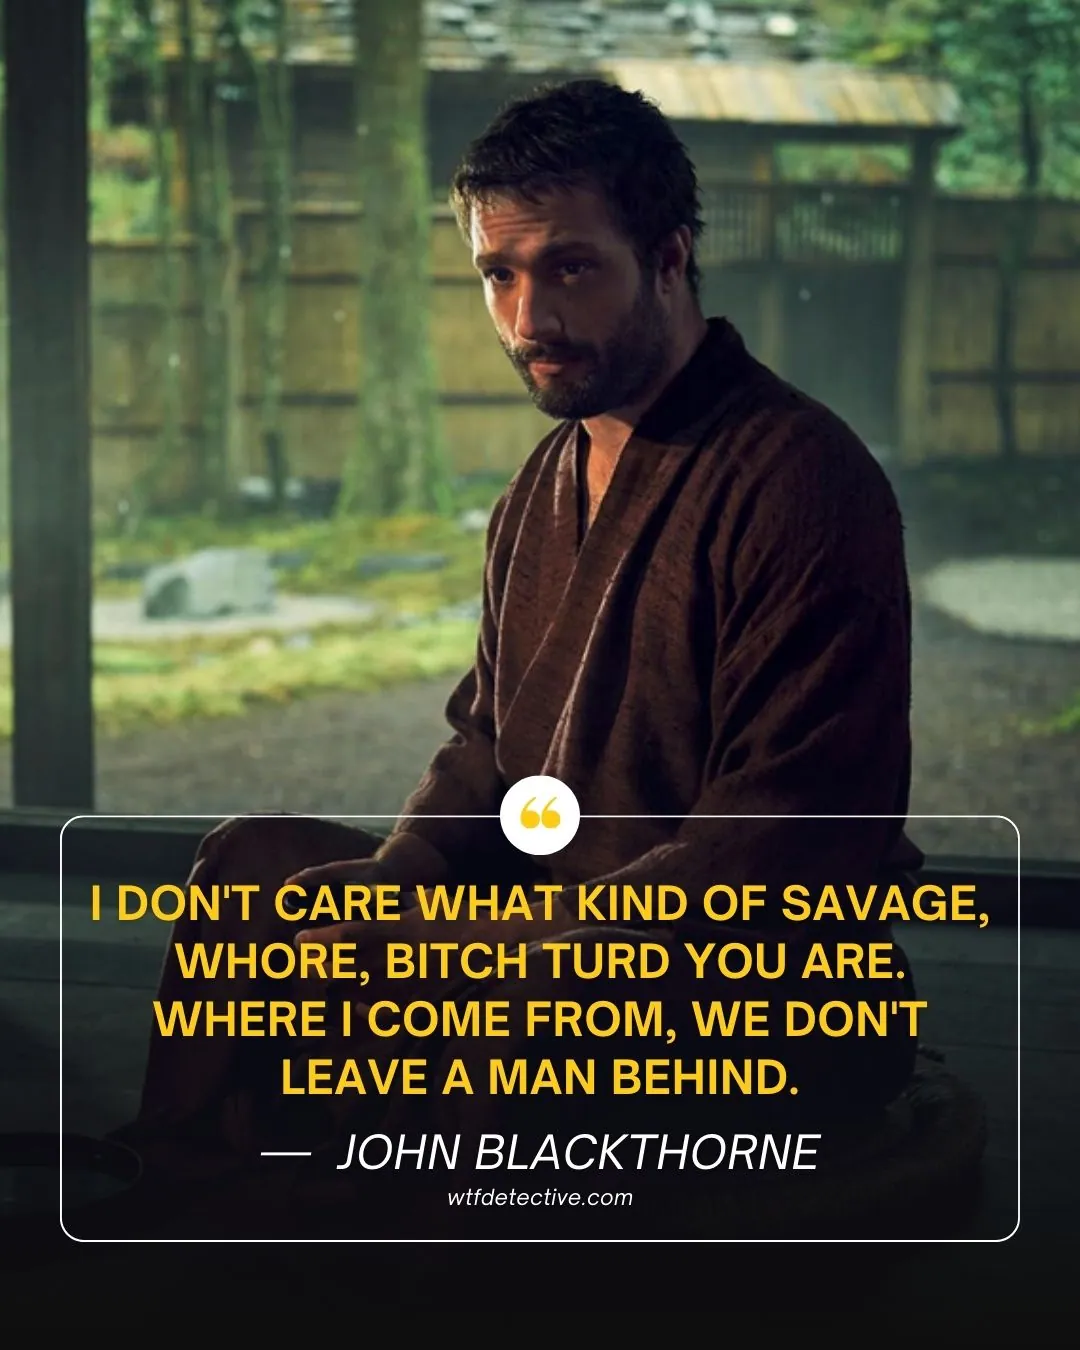 I don't care what kind of savage quotes,  we don't leave a man behind quotes, shogun series quote, john blackthorne quote, cosmo jarvis quote saying